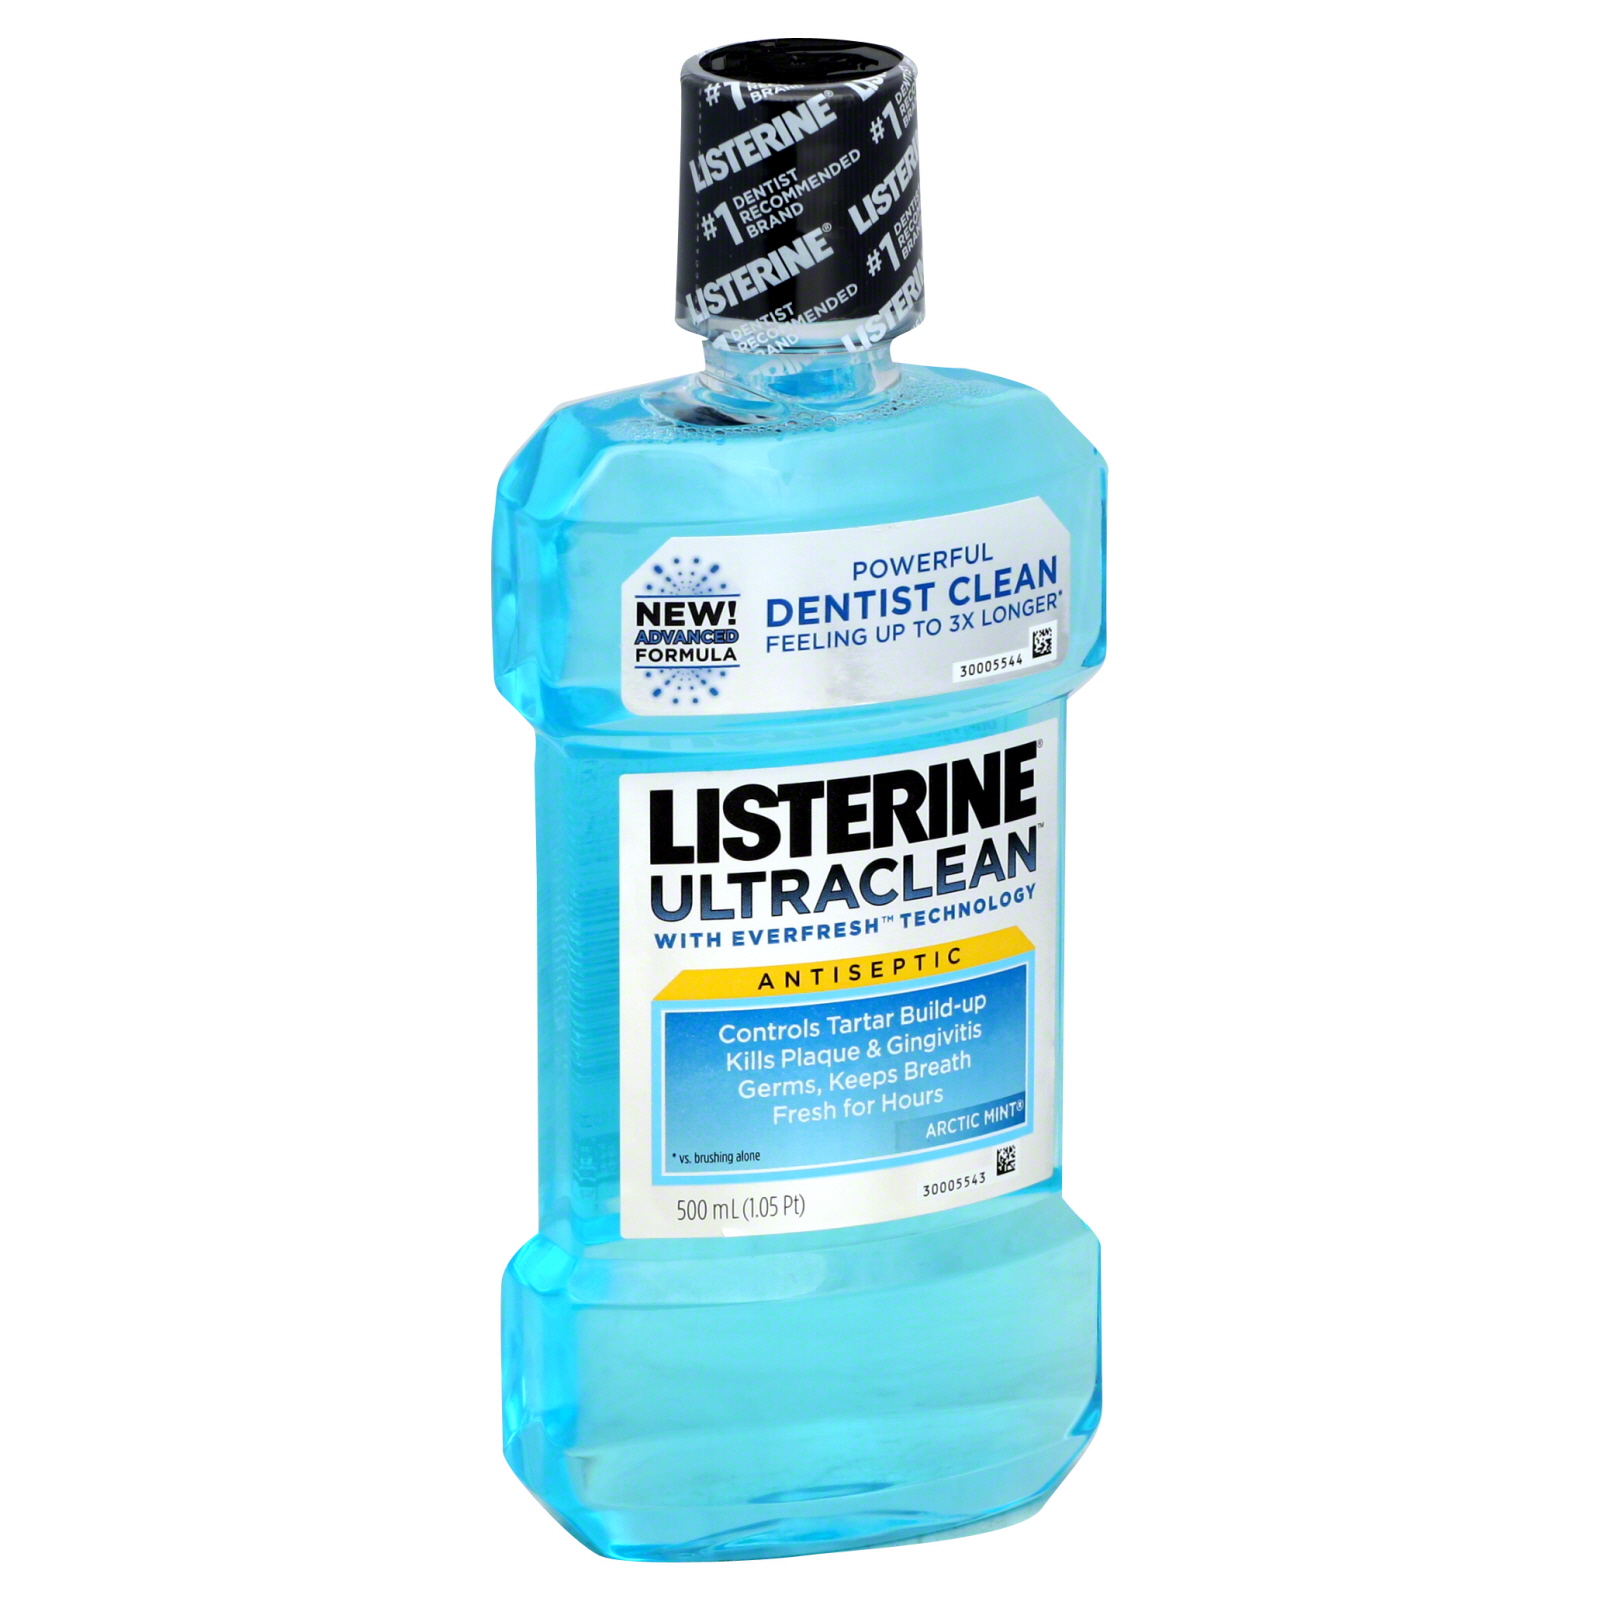 Listerine  Ultraclean Antiseptic Mouthwash, Arctic Mint, 500 ml